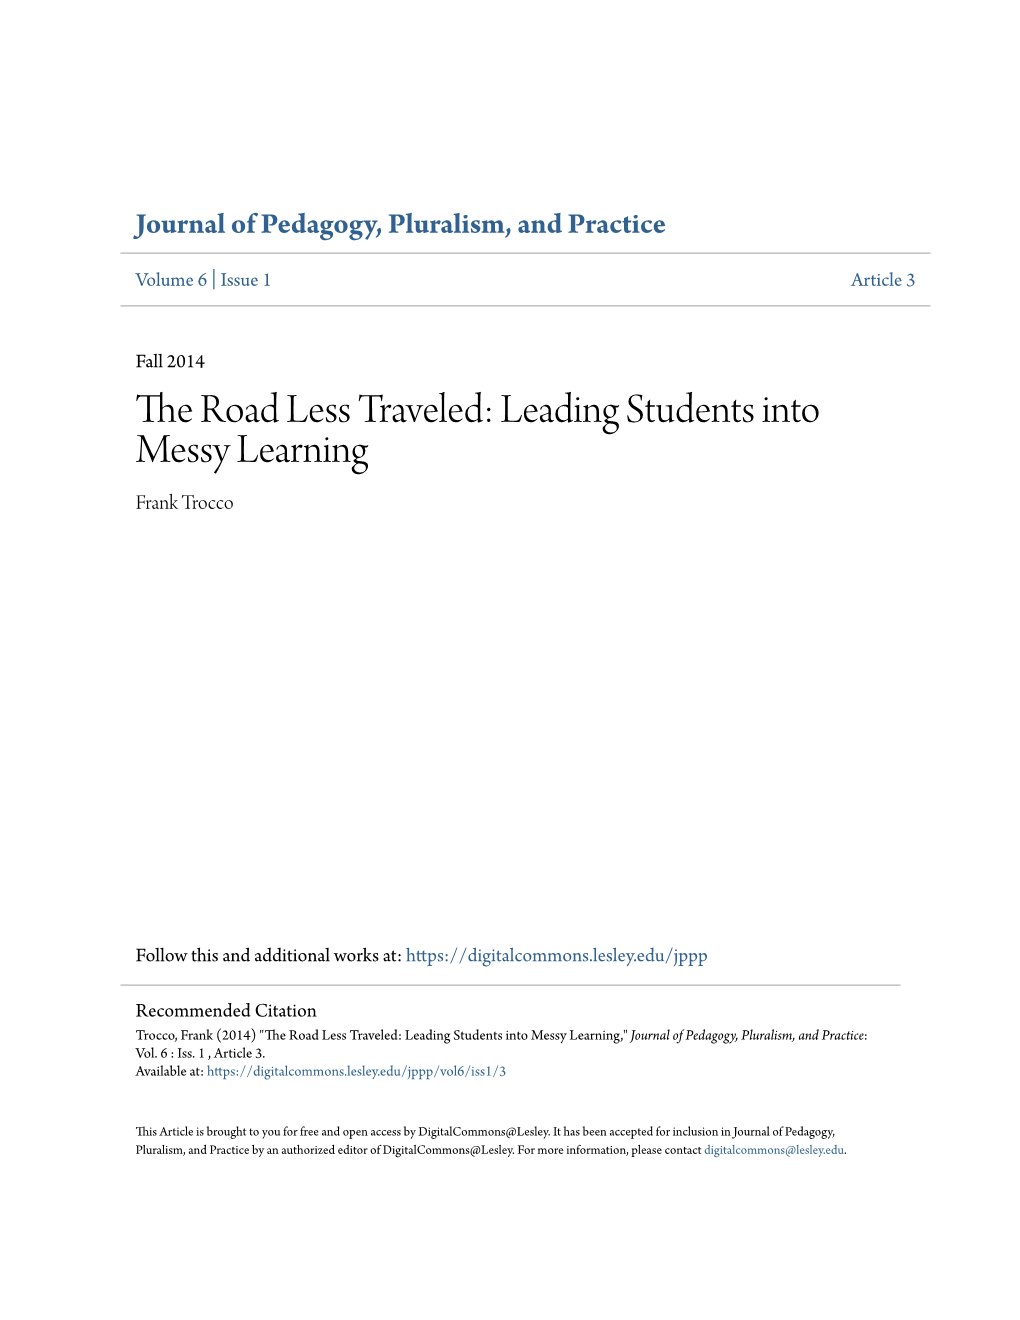 The Road Less Traveled: Leading Students Into Messy Learning Frank Trocco